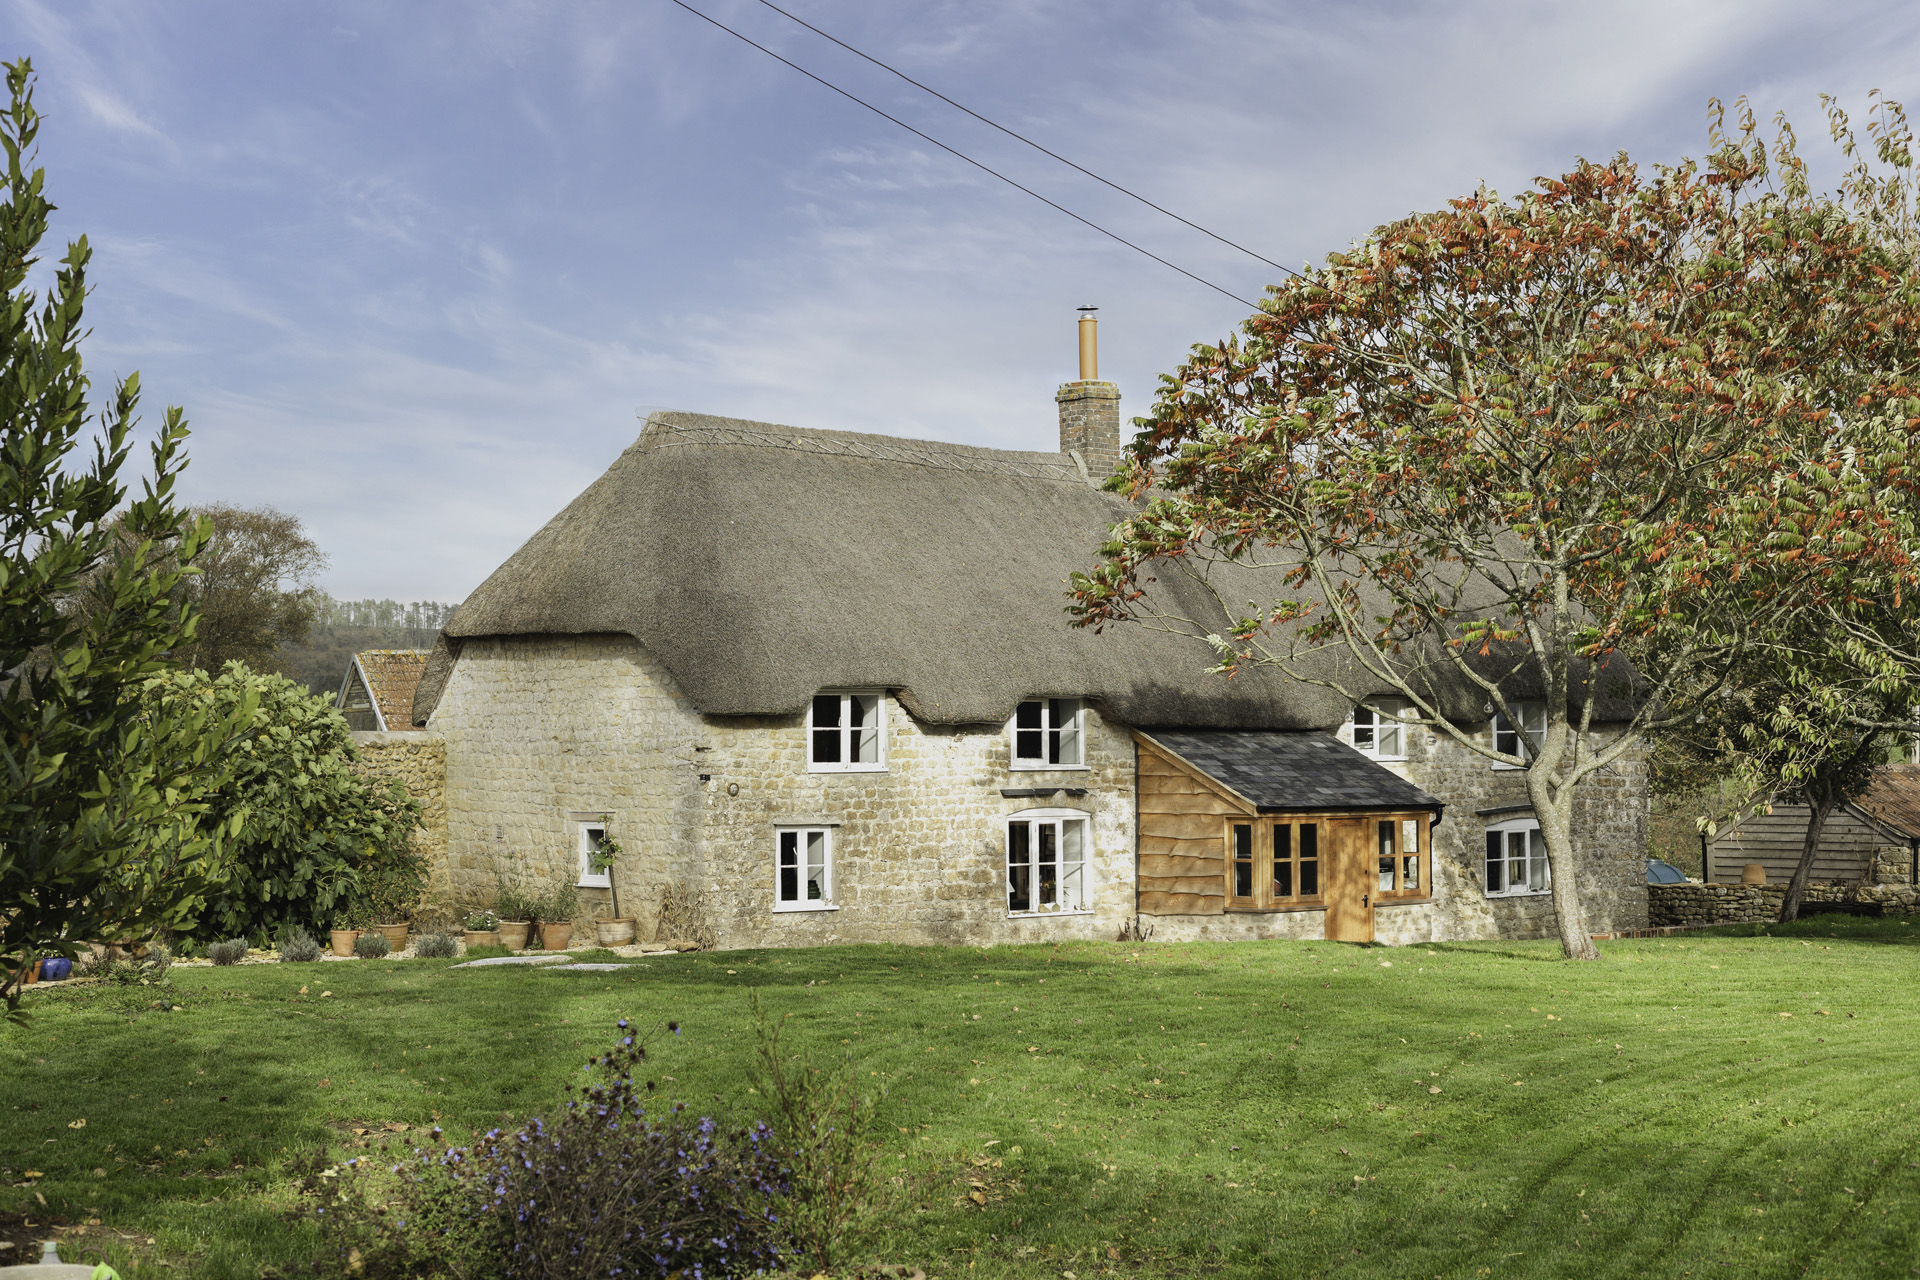 A cottage with a thatched roof, ideal for a weekend escape